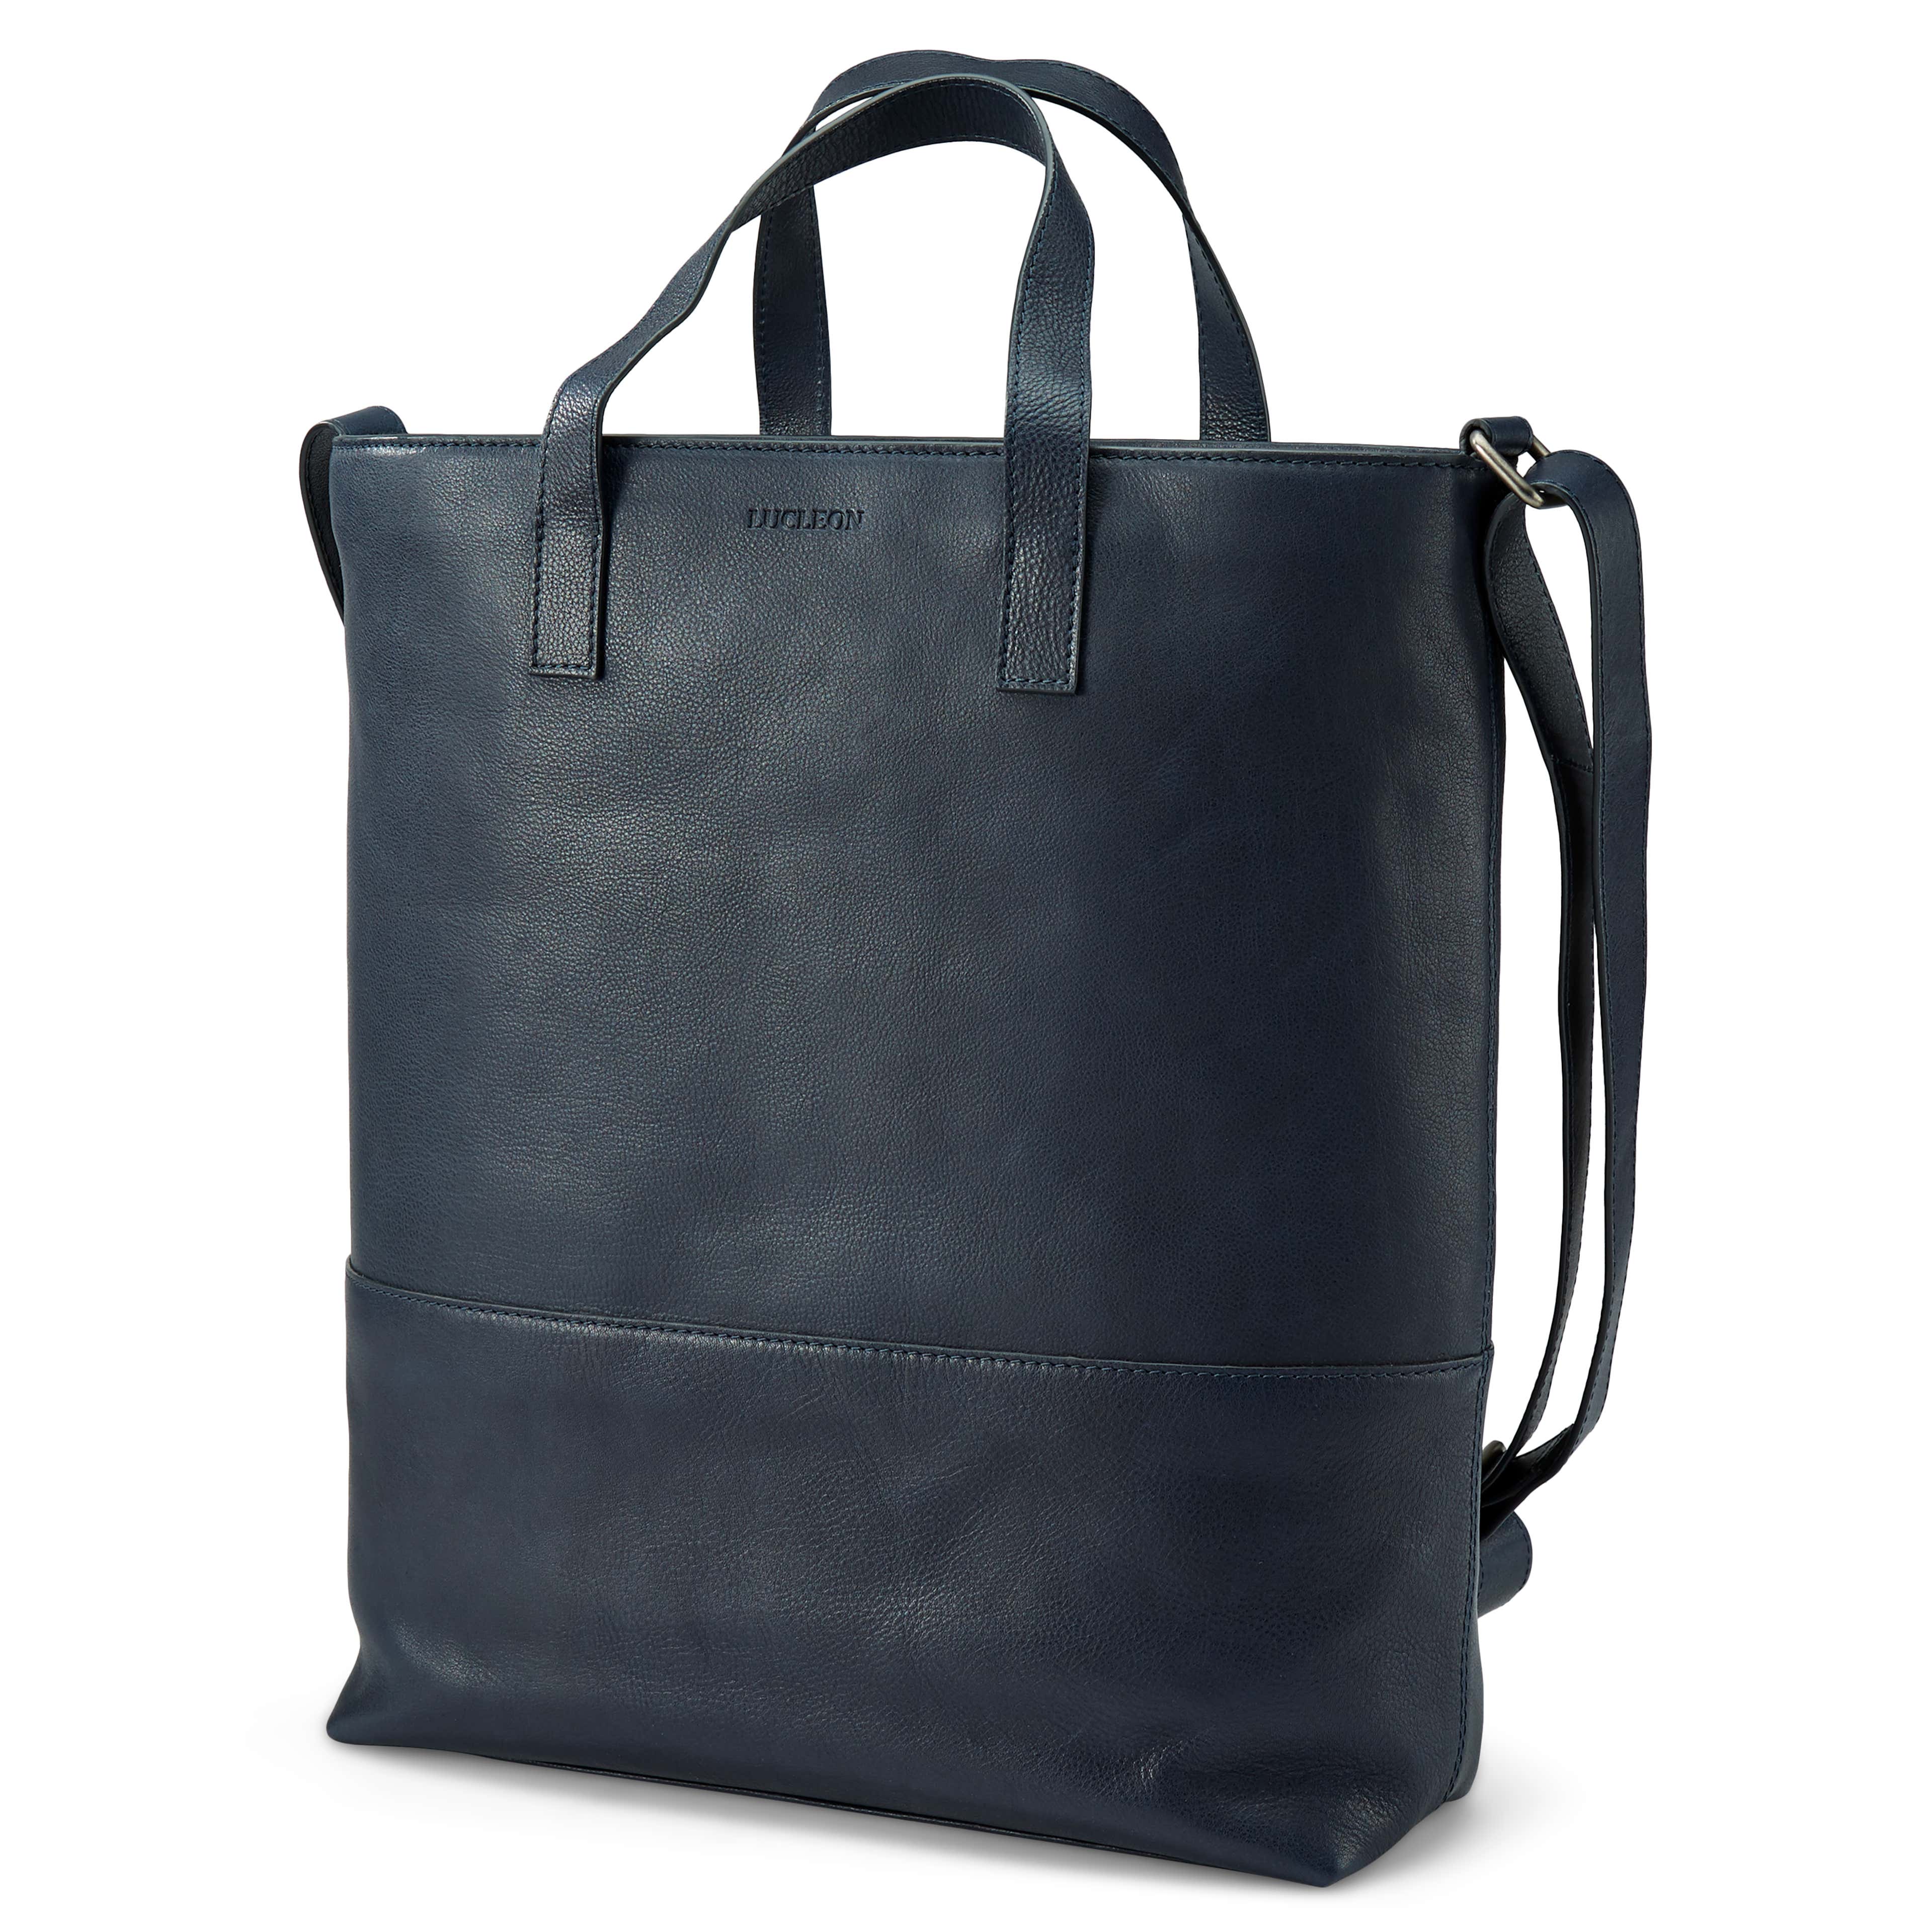 Lon Navy Leather Tote